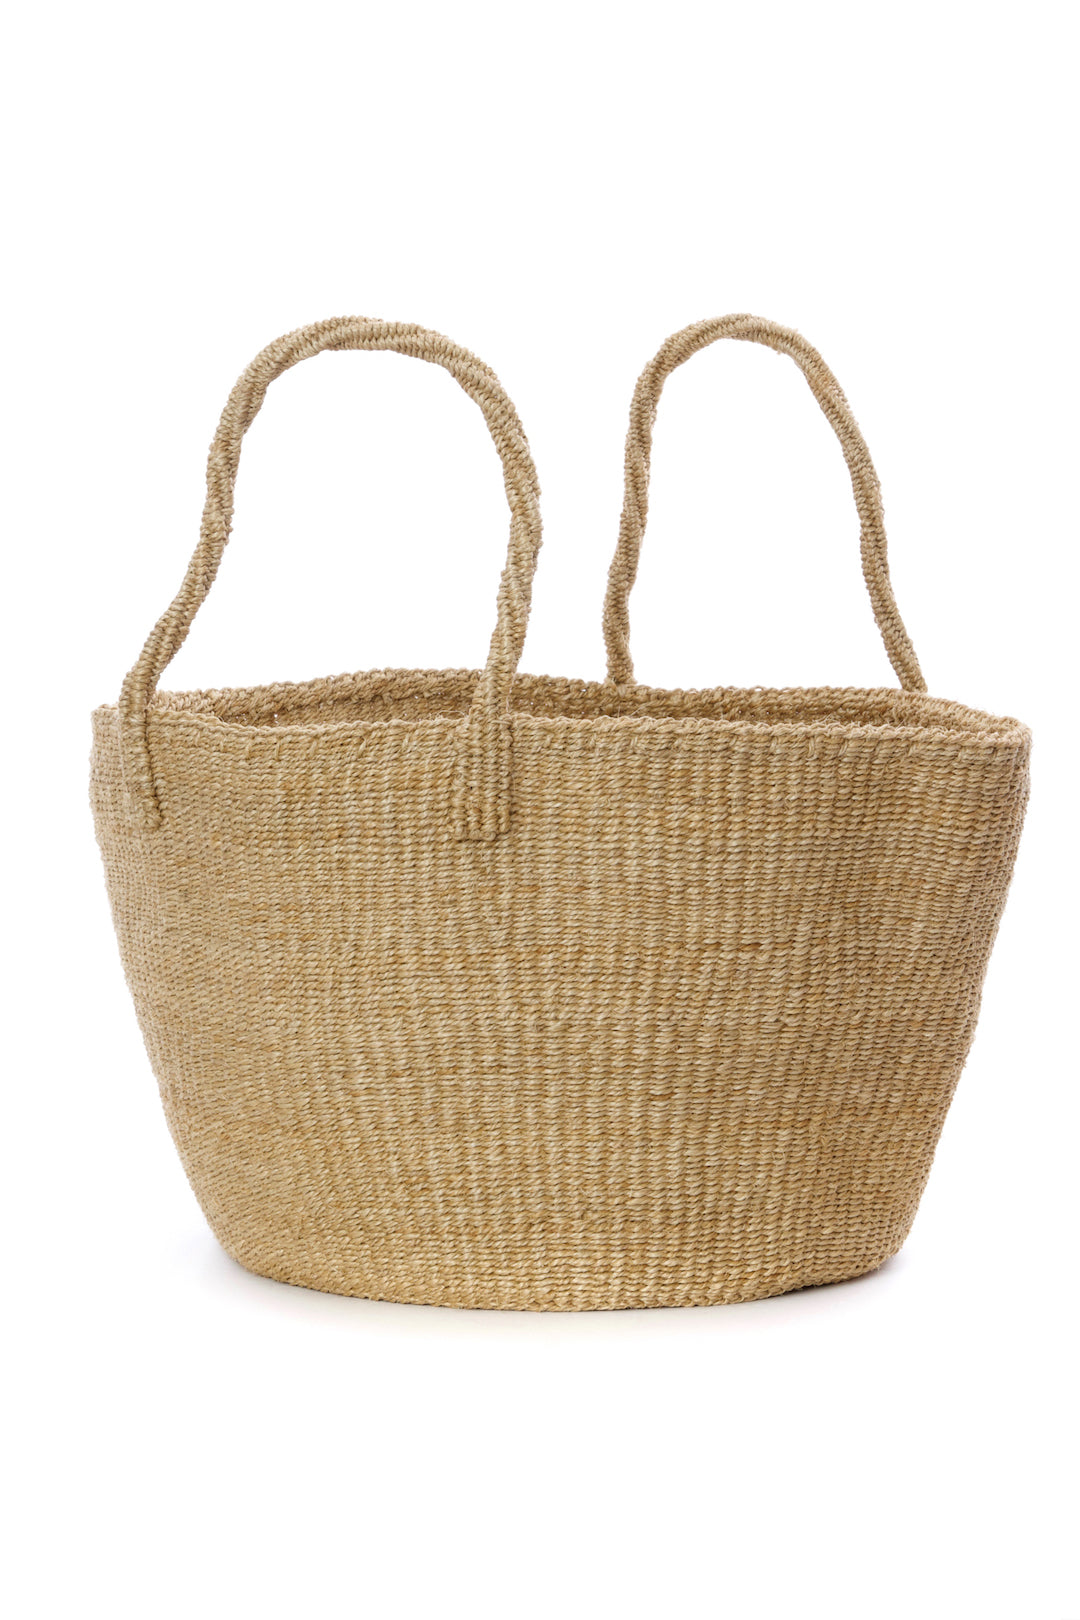 Classic Sisal Grass Tote in Wheat Default Title